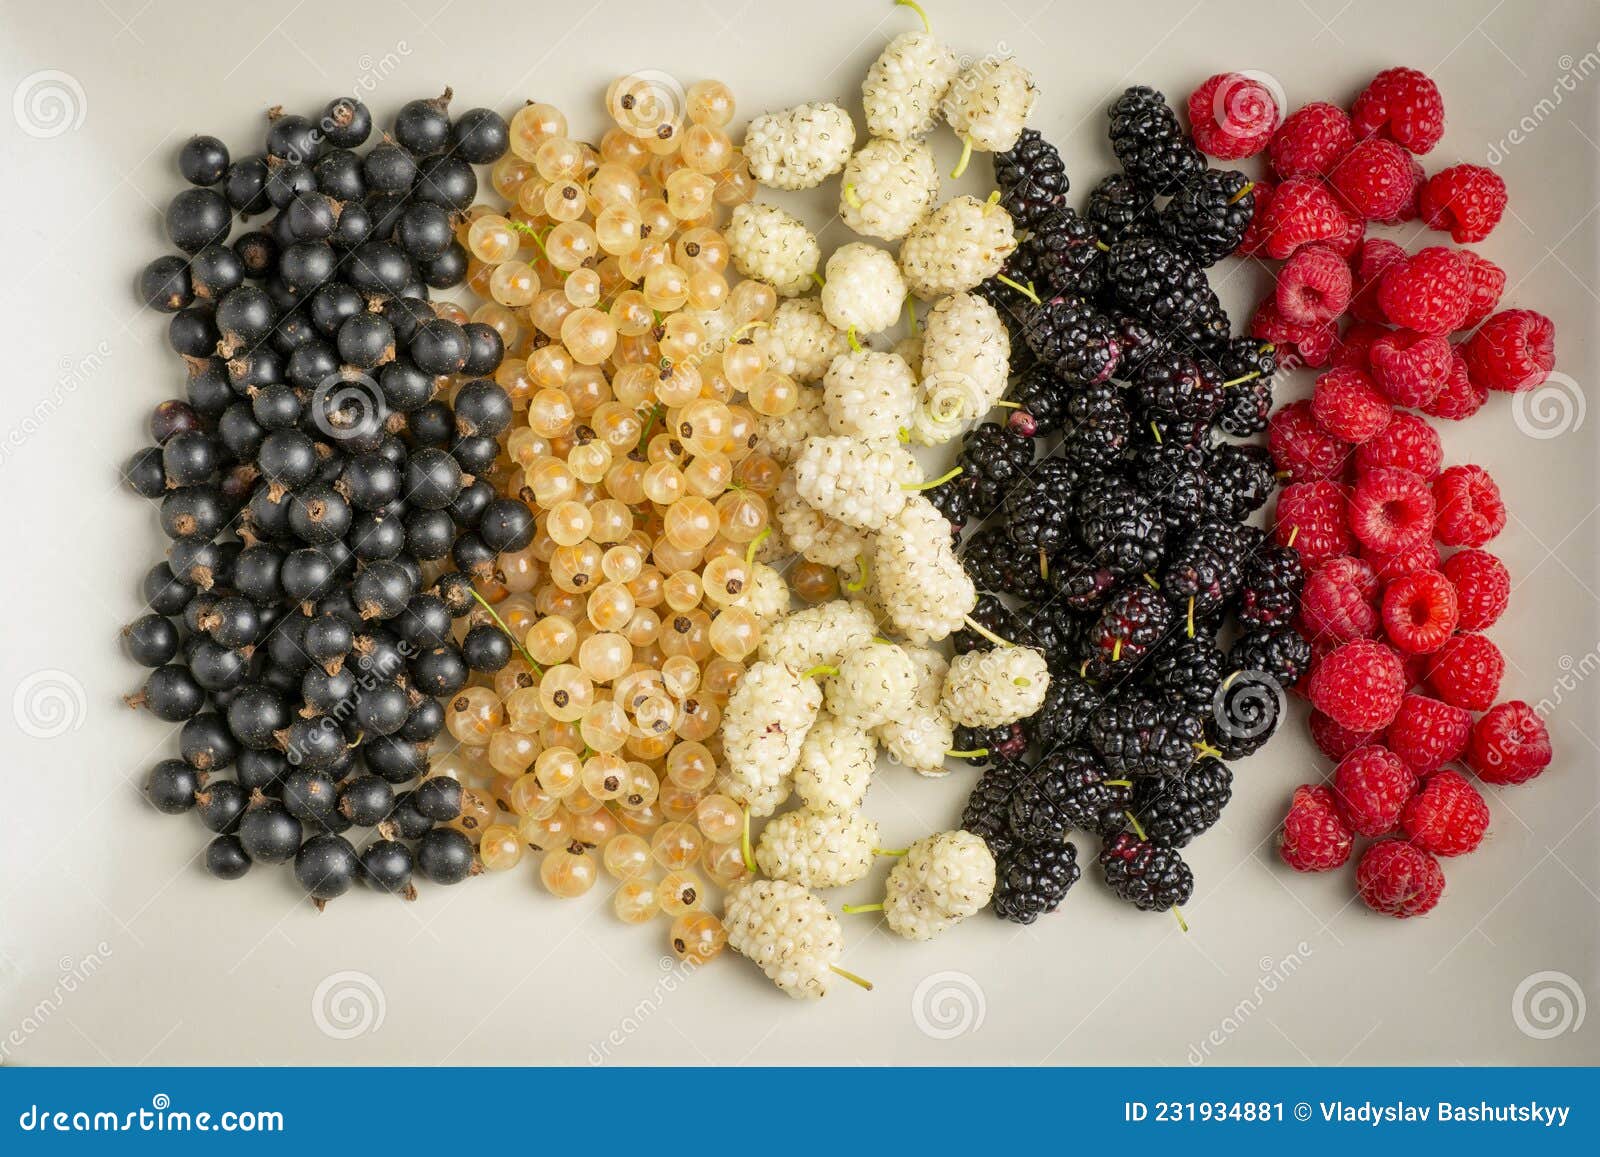 mix of fresh berries in on plate on wooden background. antioxidants, detox diet, organic fruits.